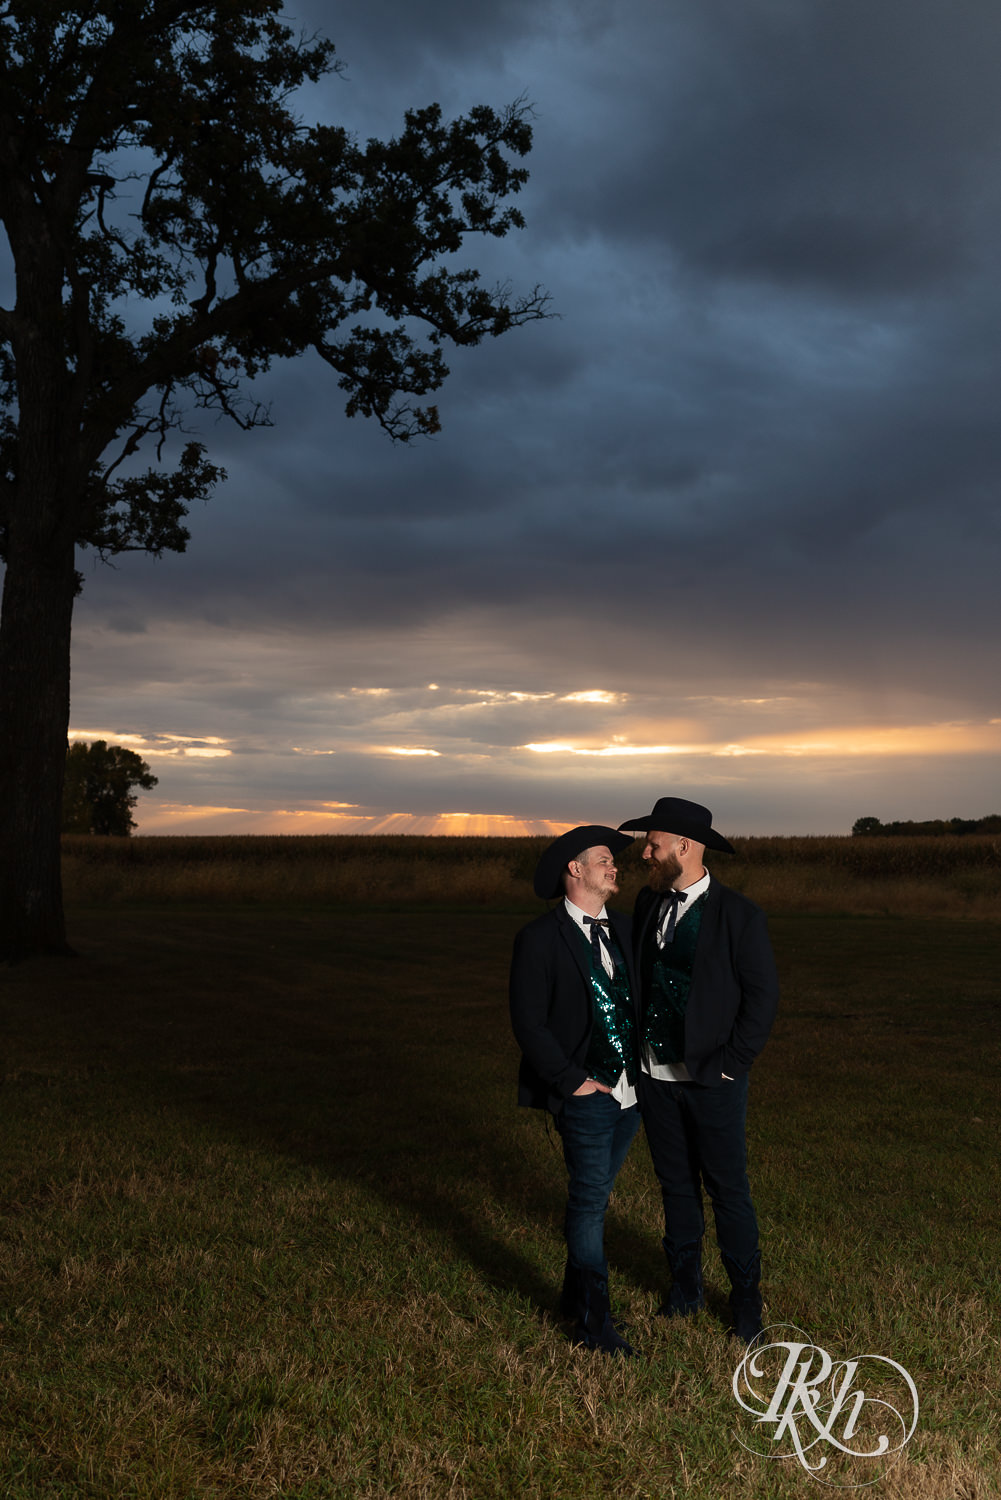 Grooms looking at each other during sunset on their wedding day.